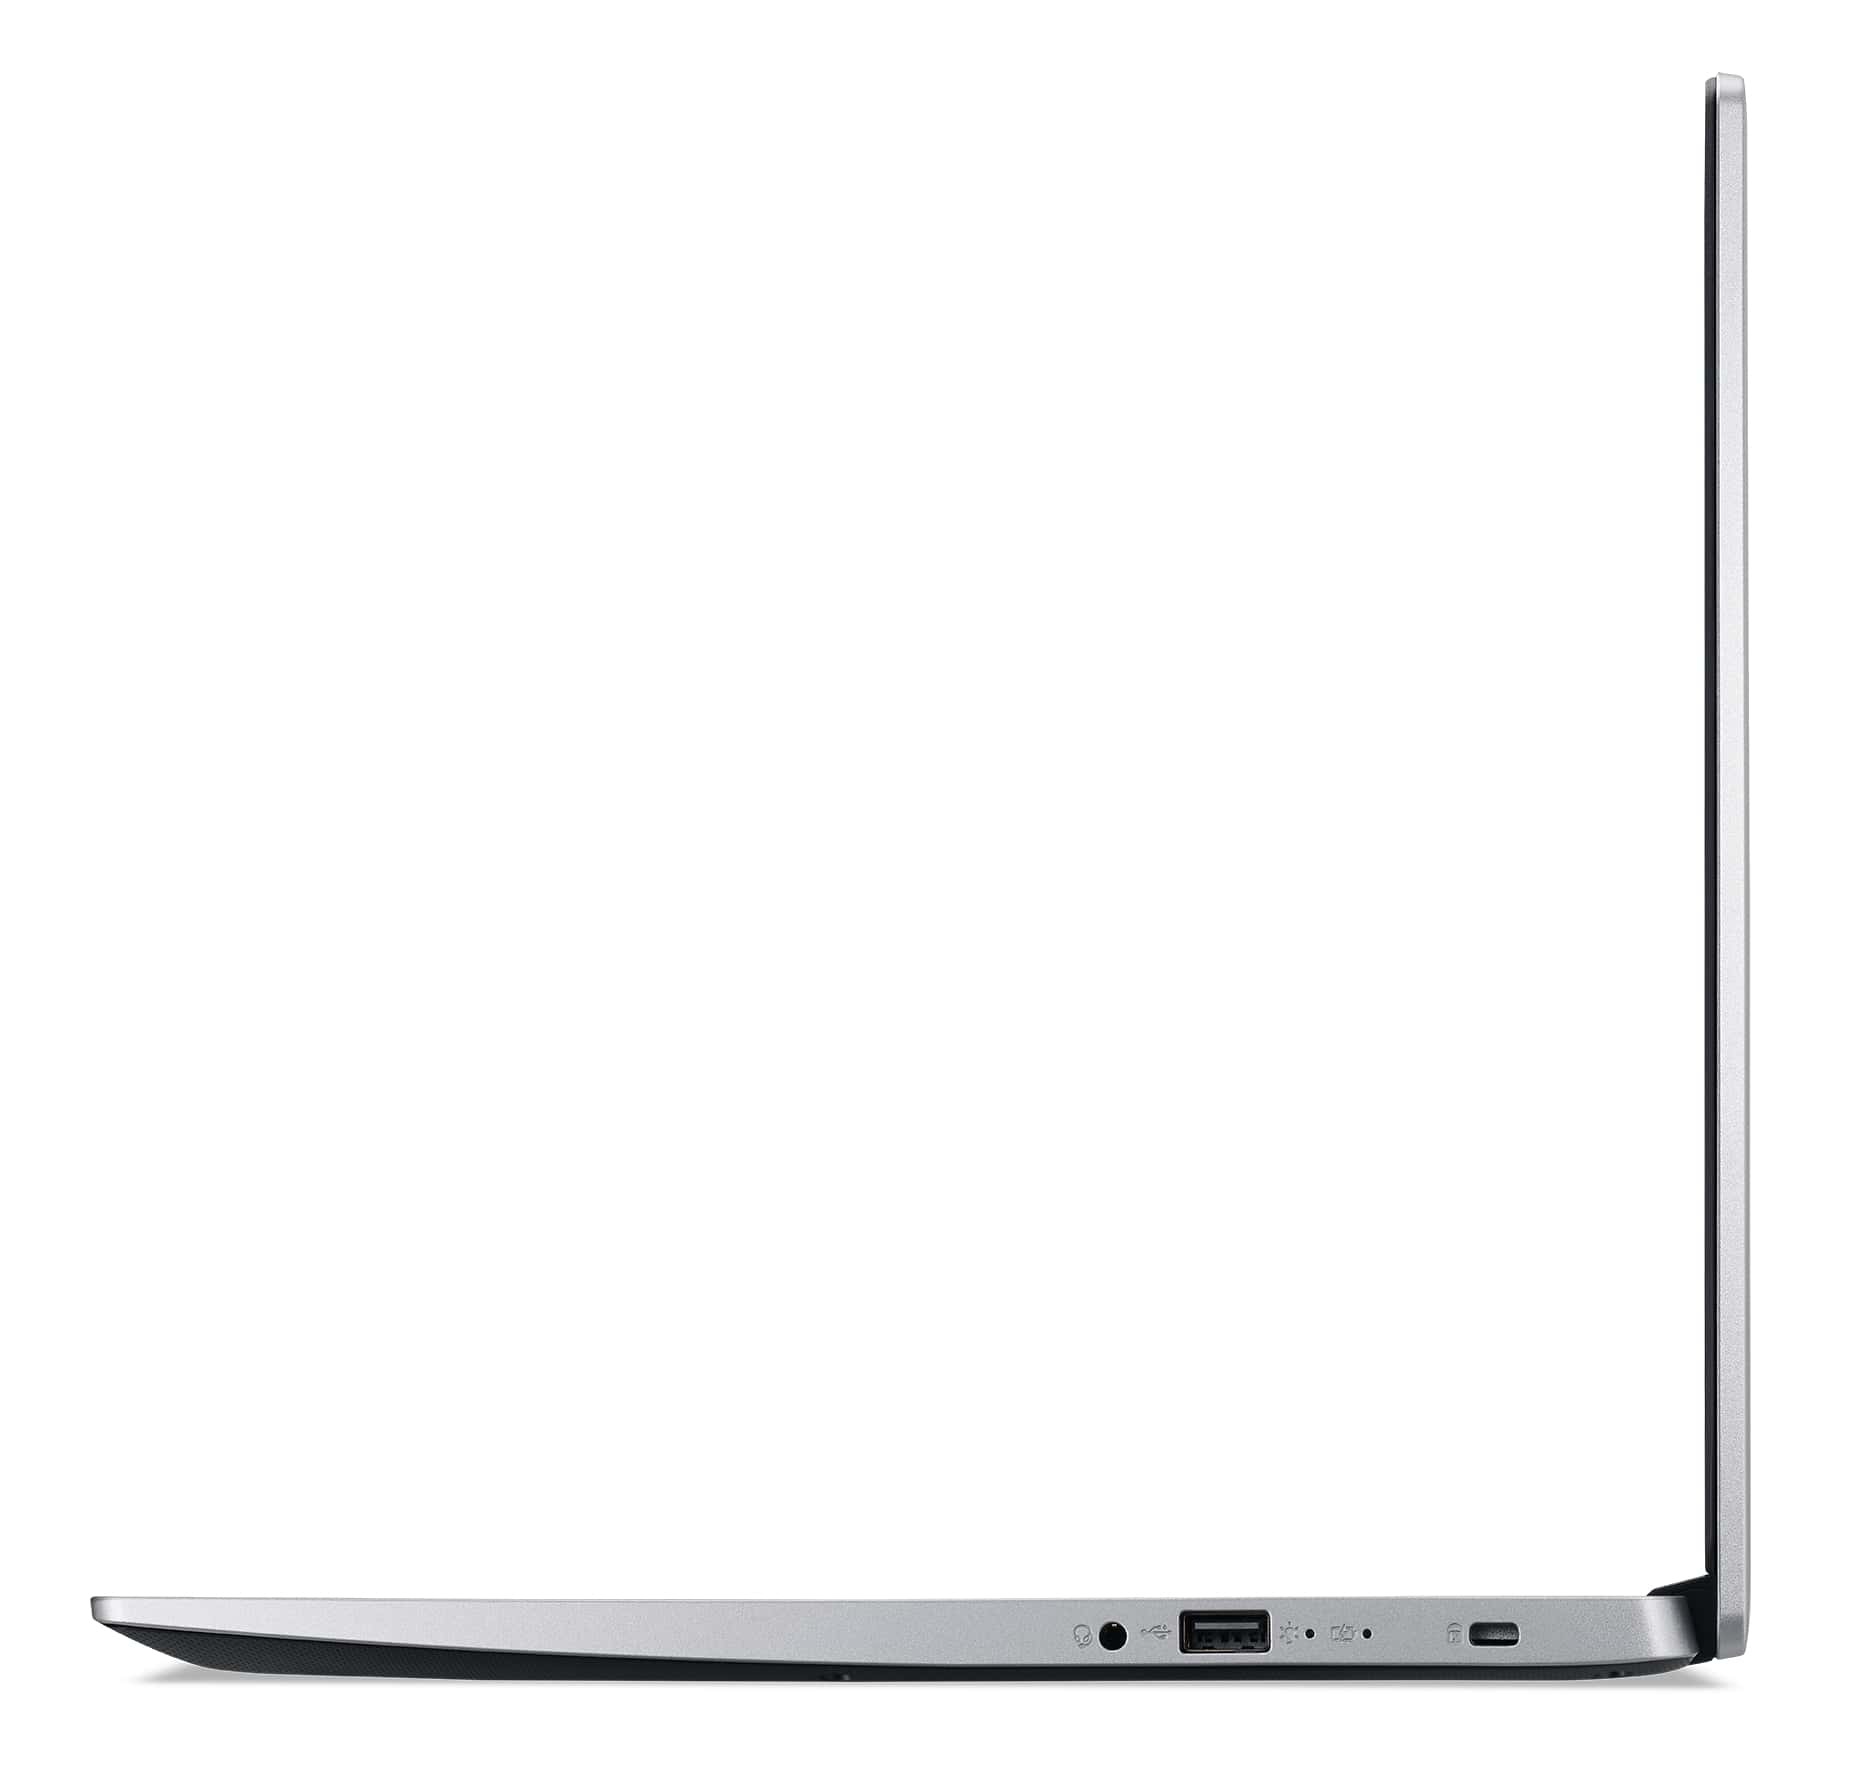 Acer Aspire 3 A315-23-R0GT laptop - Silver